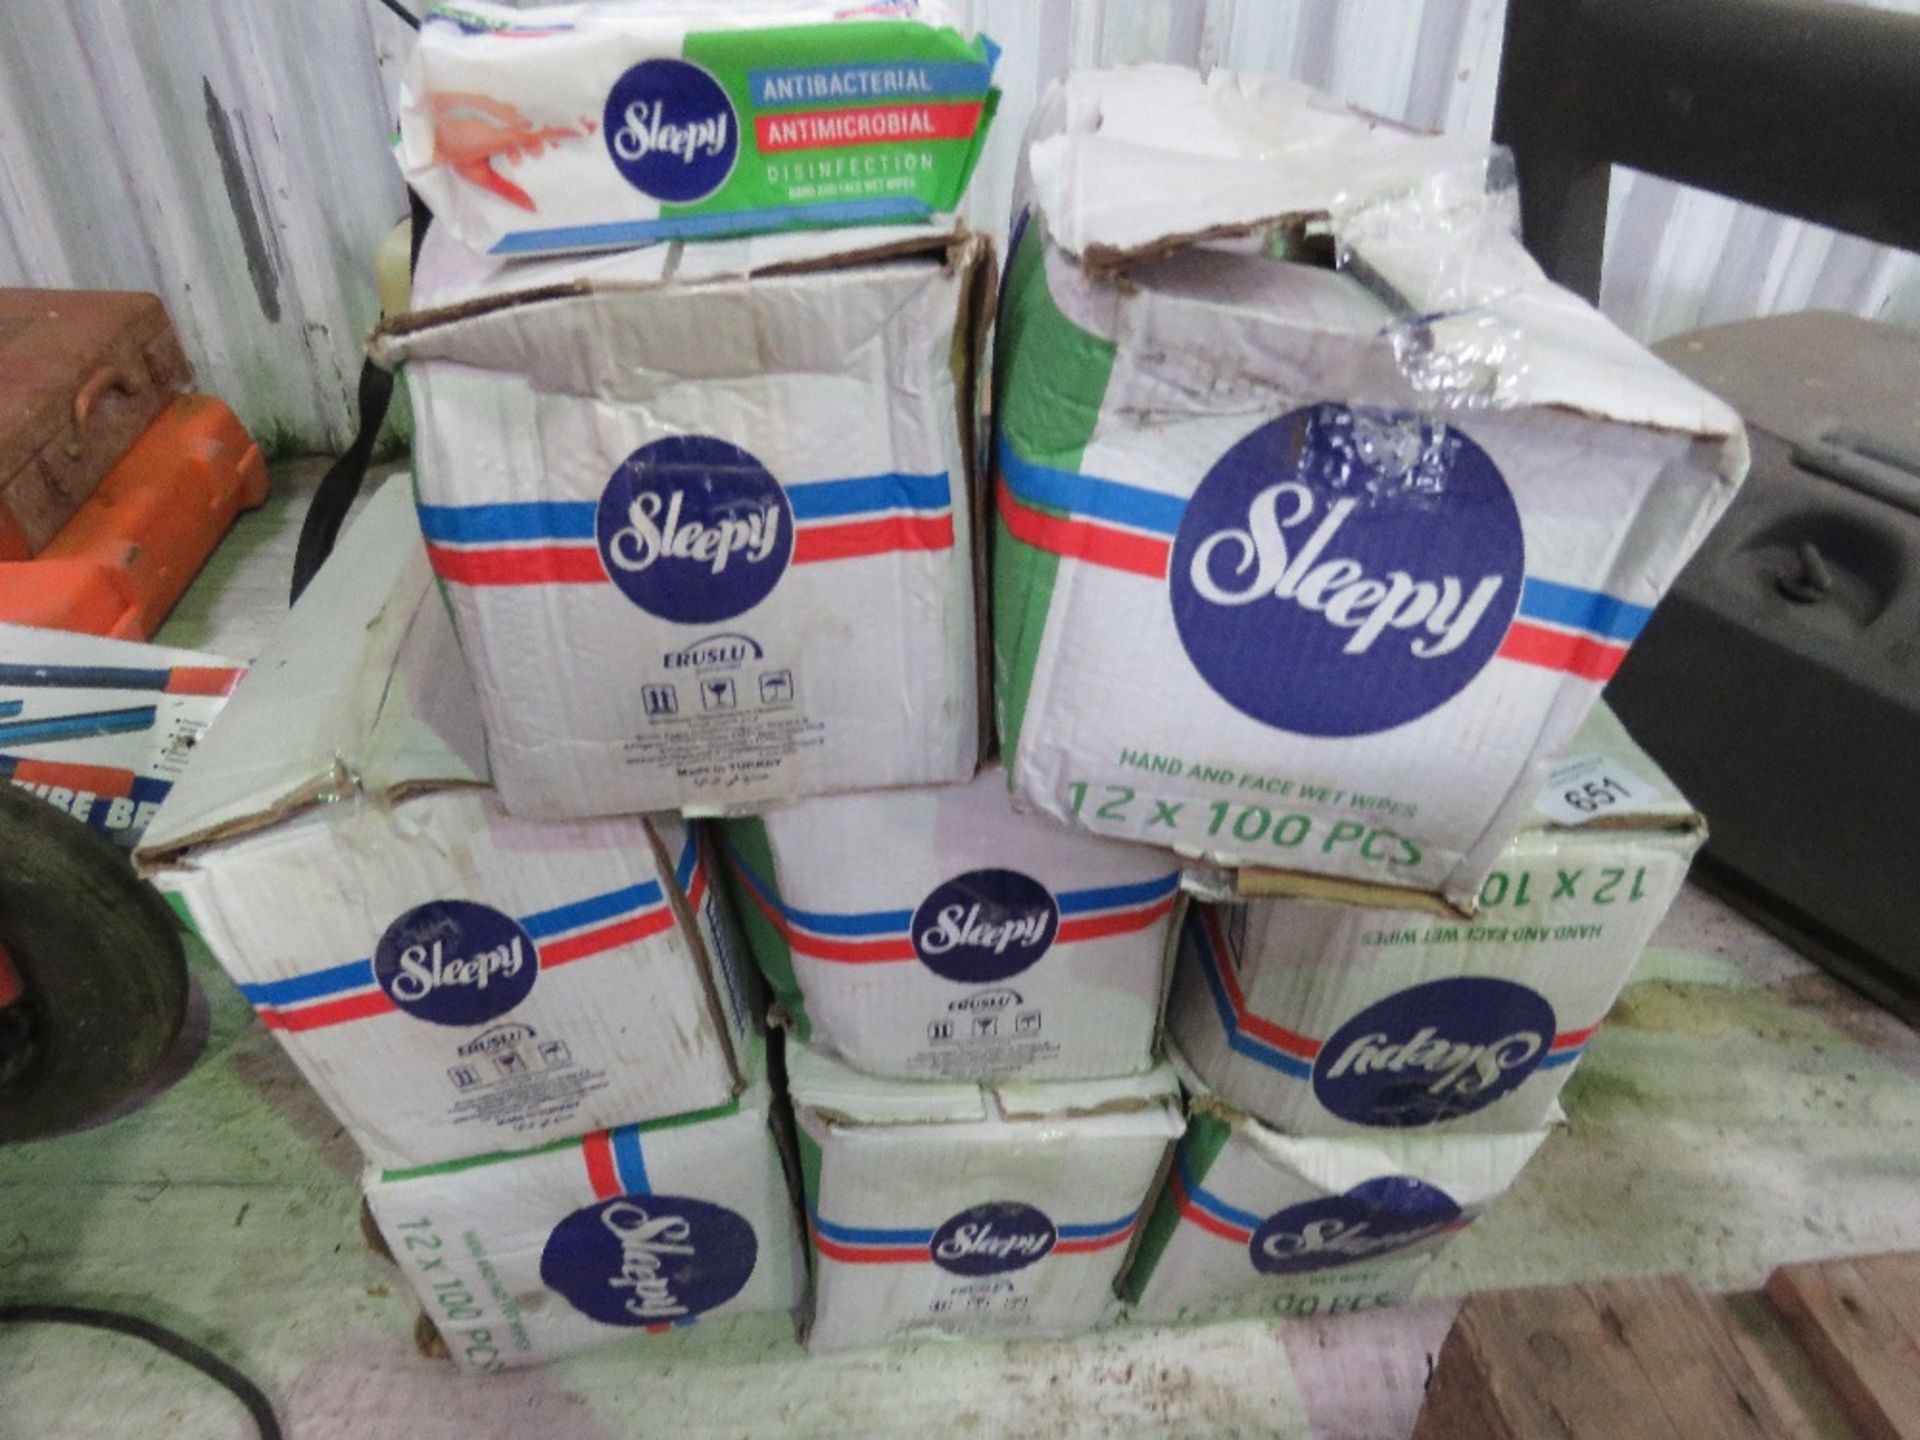 8 X BOXES OF SLEEPY HAND AND FACE WIPES. - Image 4 of 5